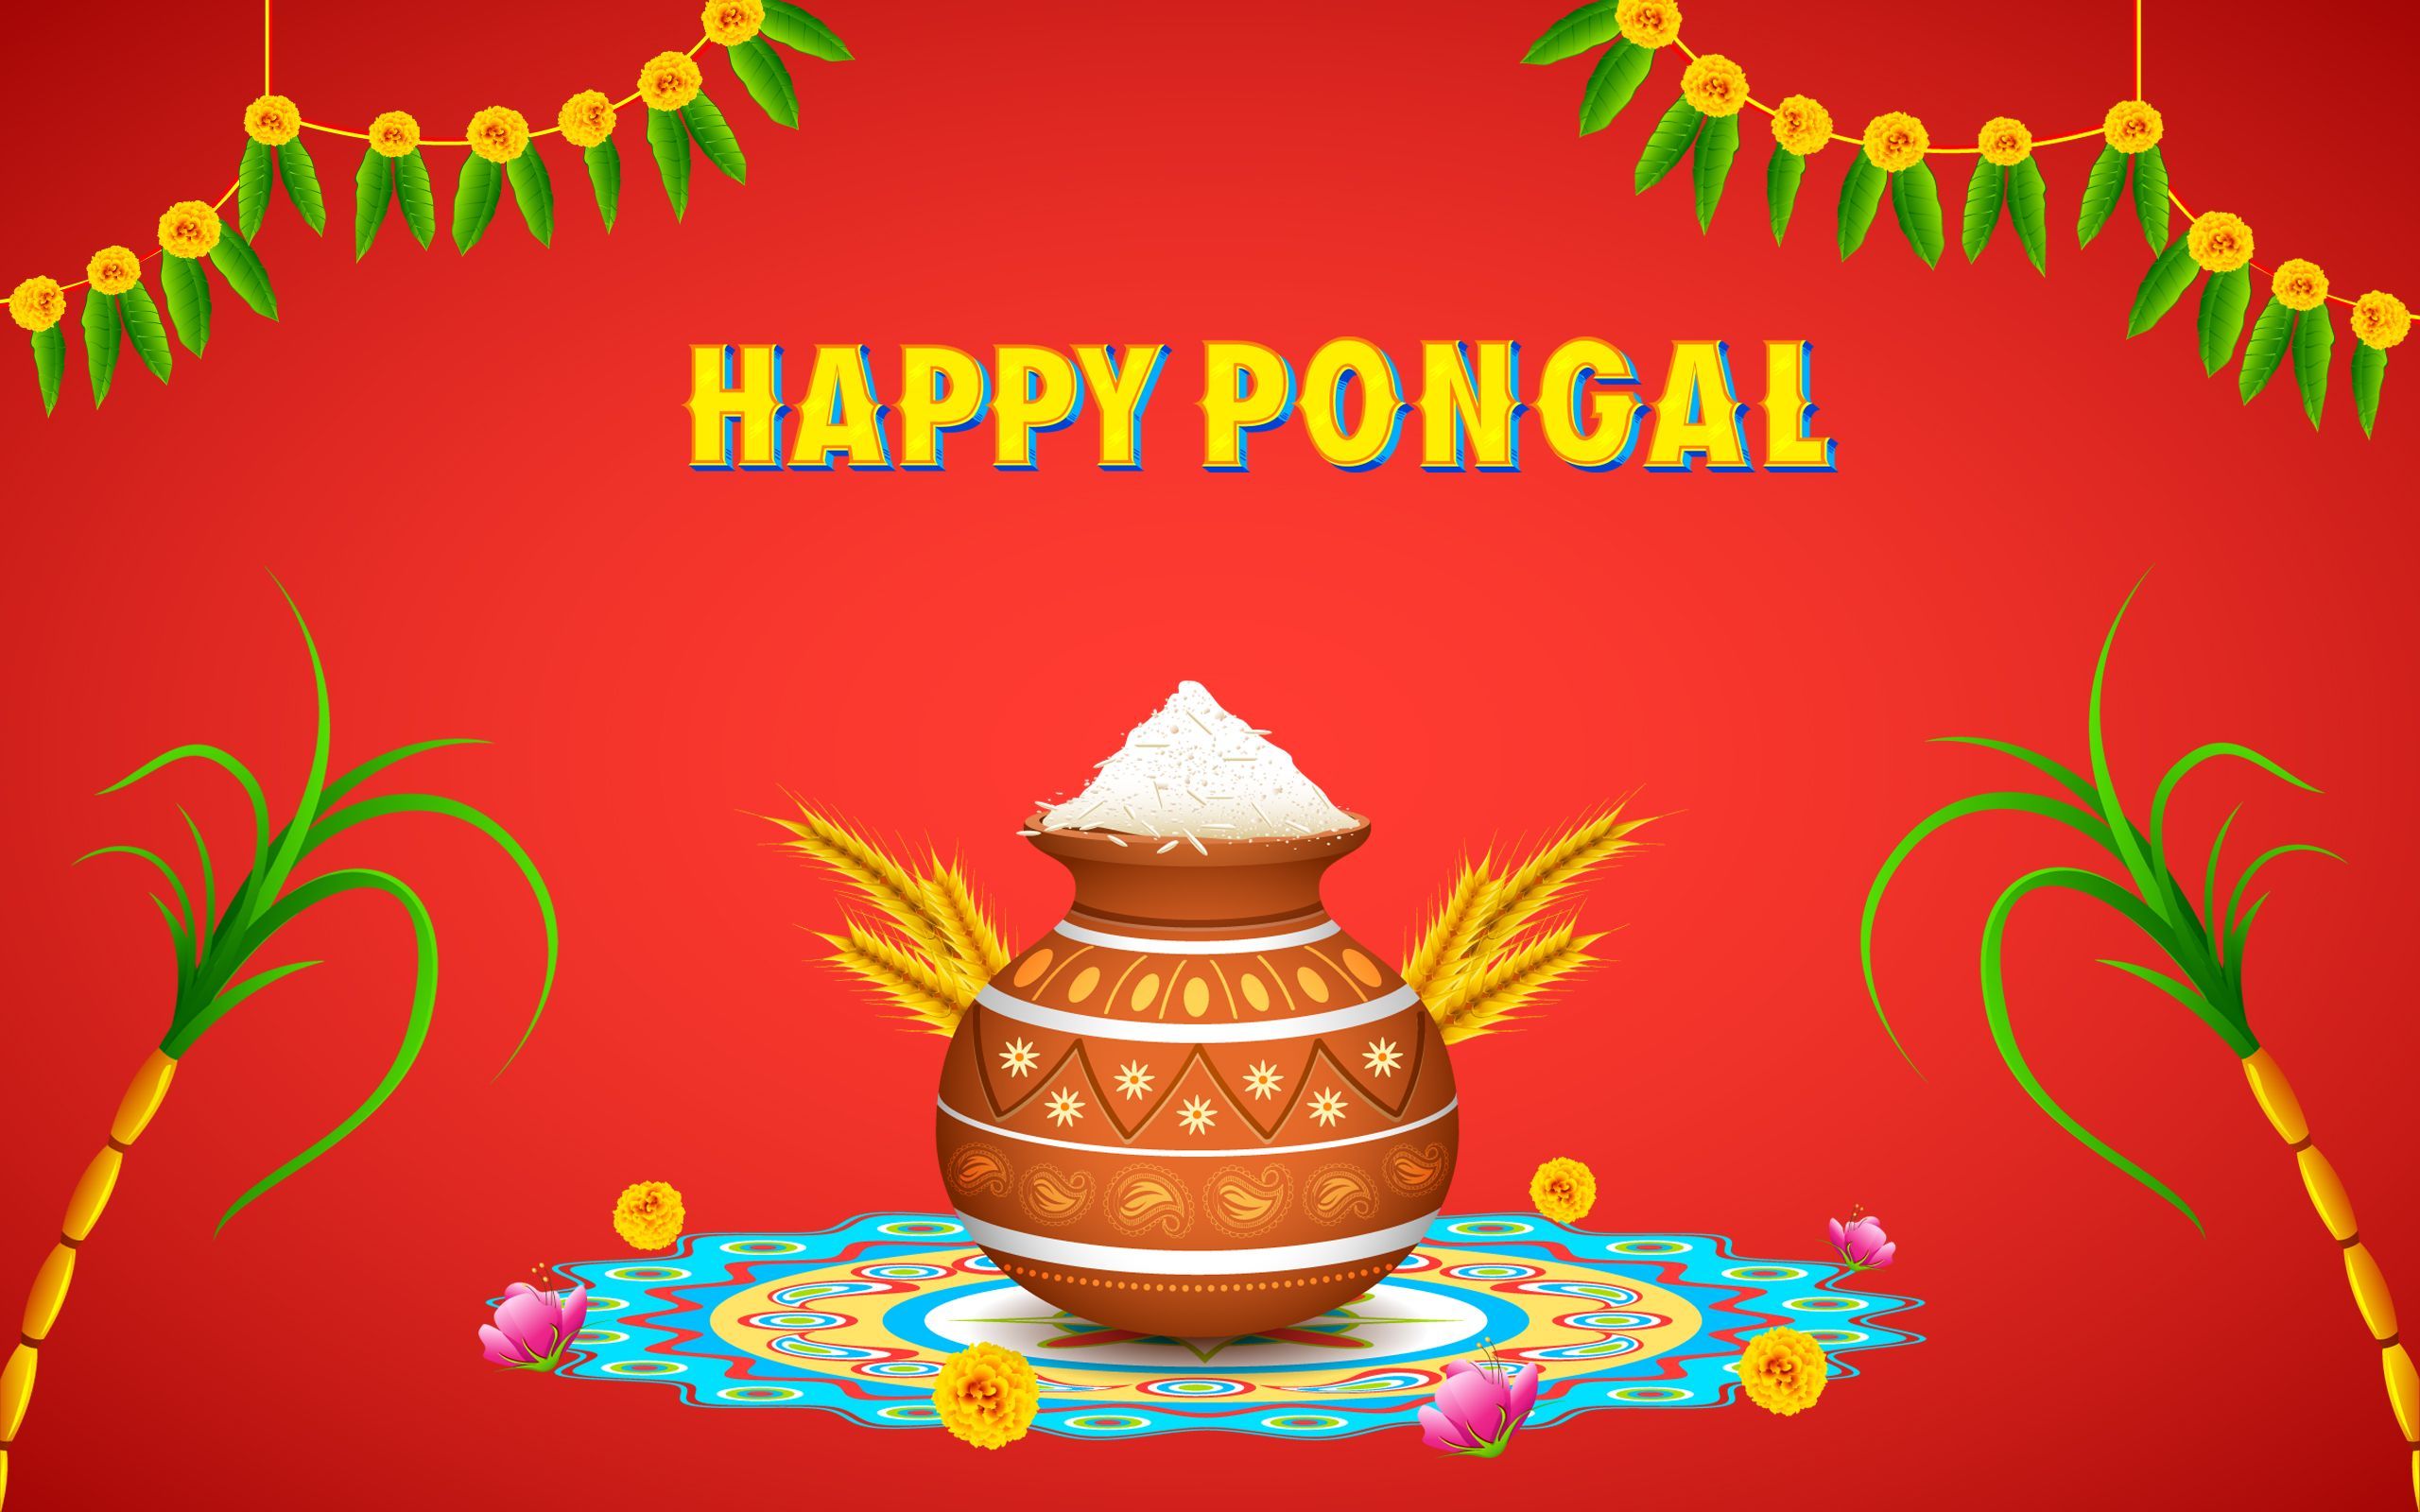 Pongal Festival Wallpapers - Wallpaper Cave